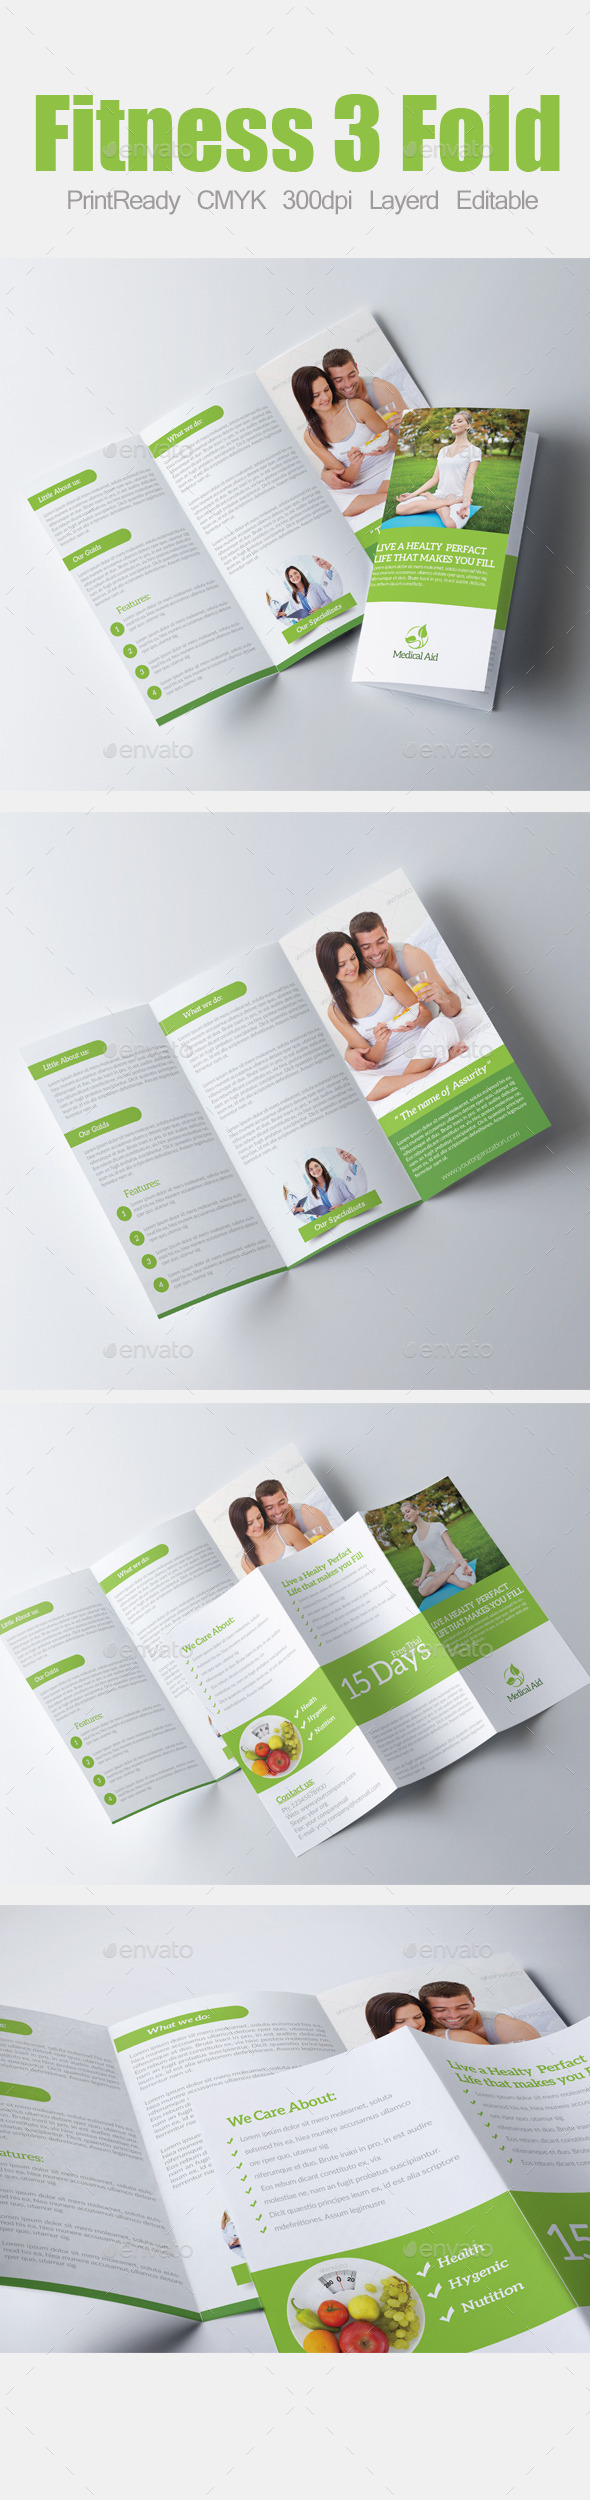 Tri Fold Fitness and Health Care Brochure